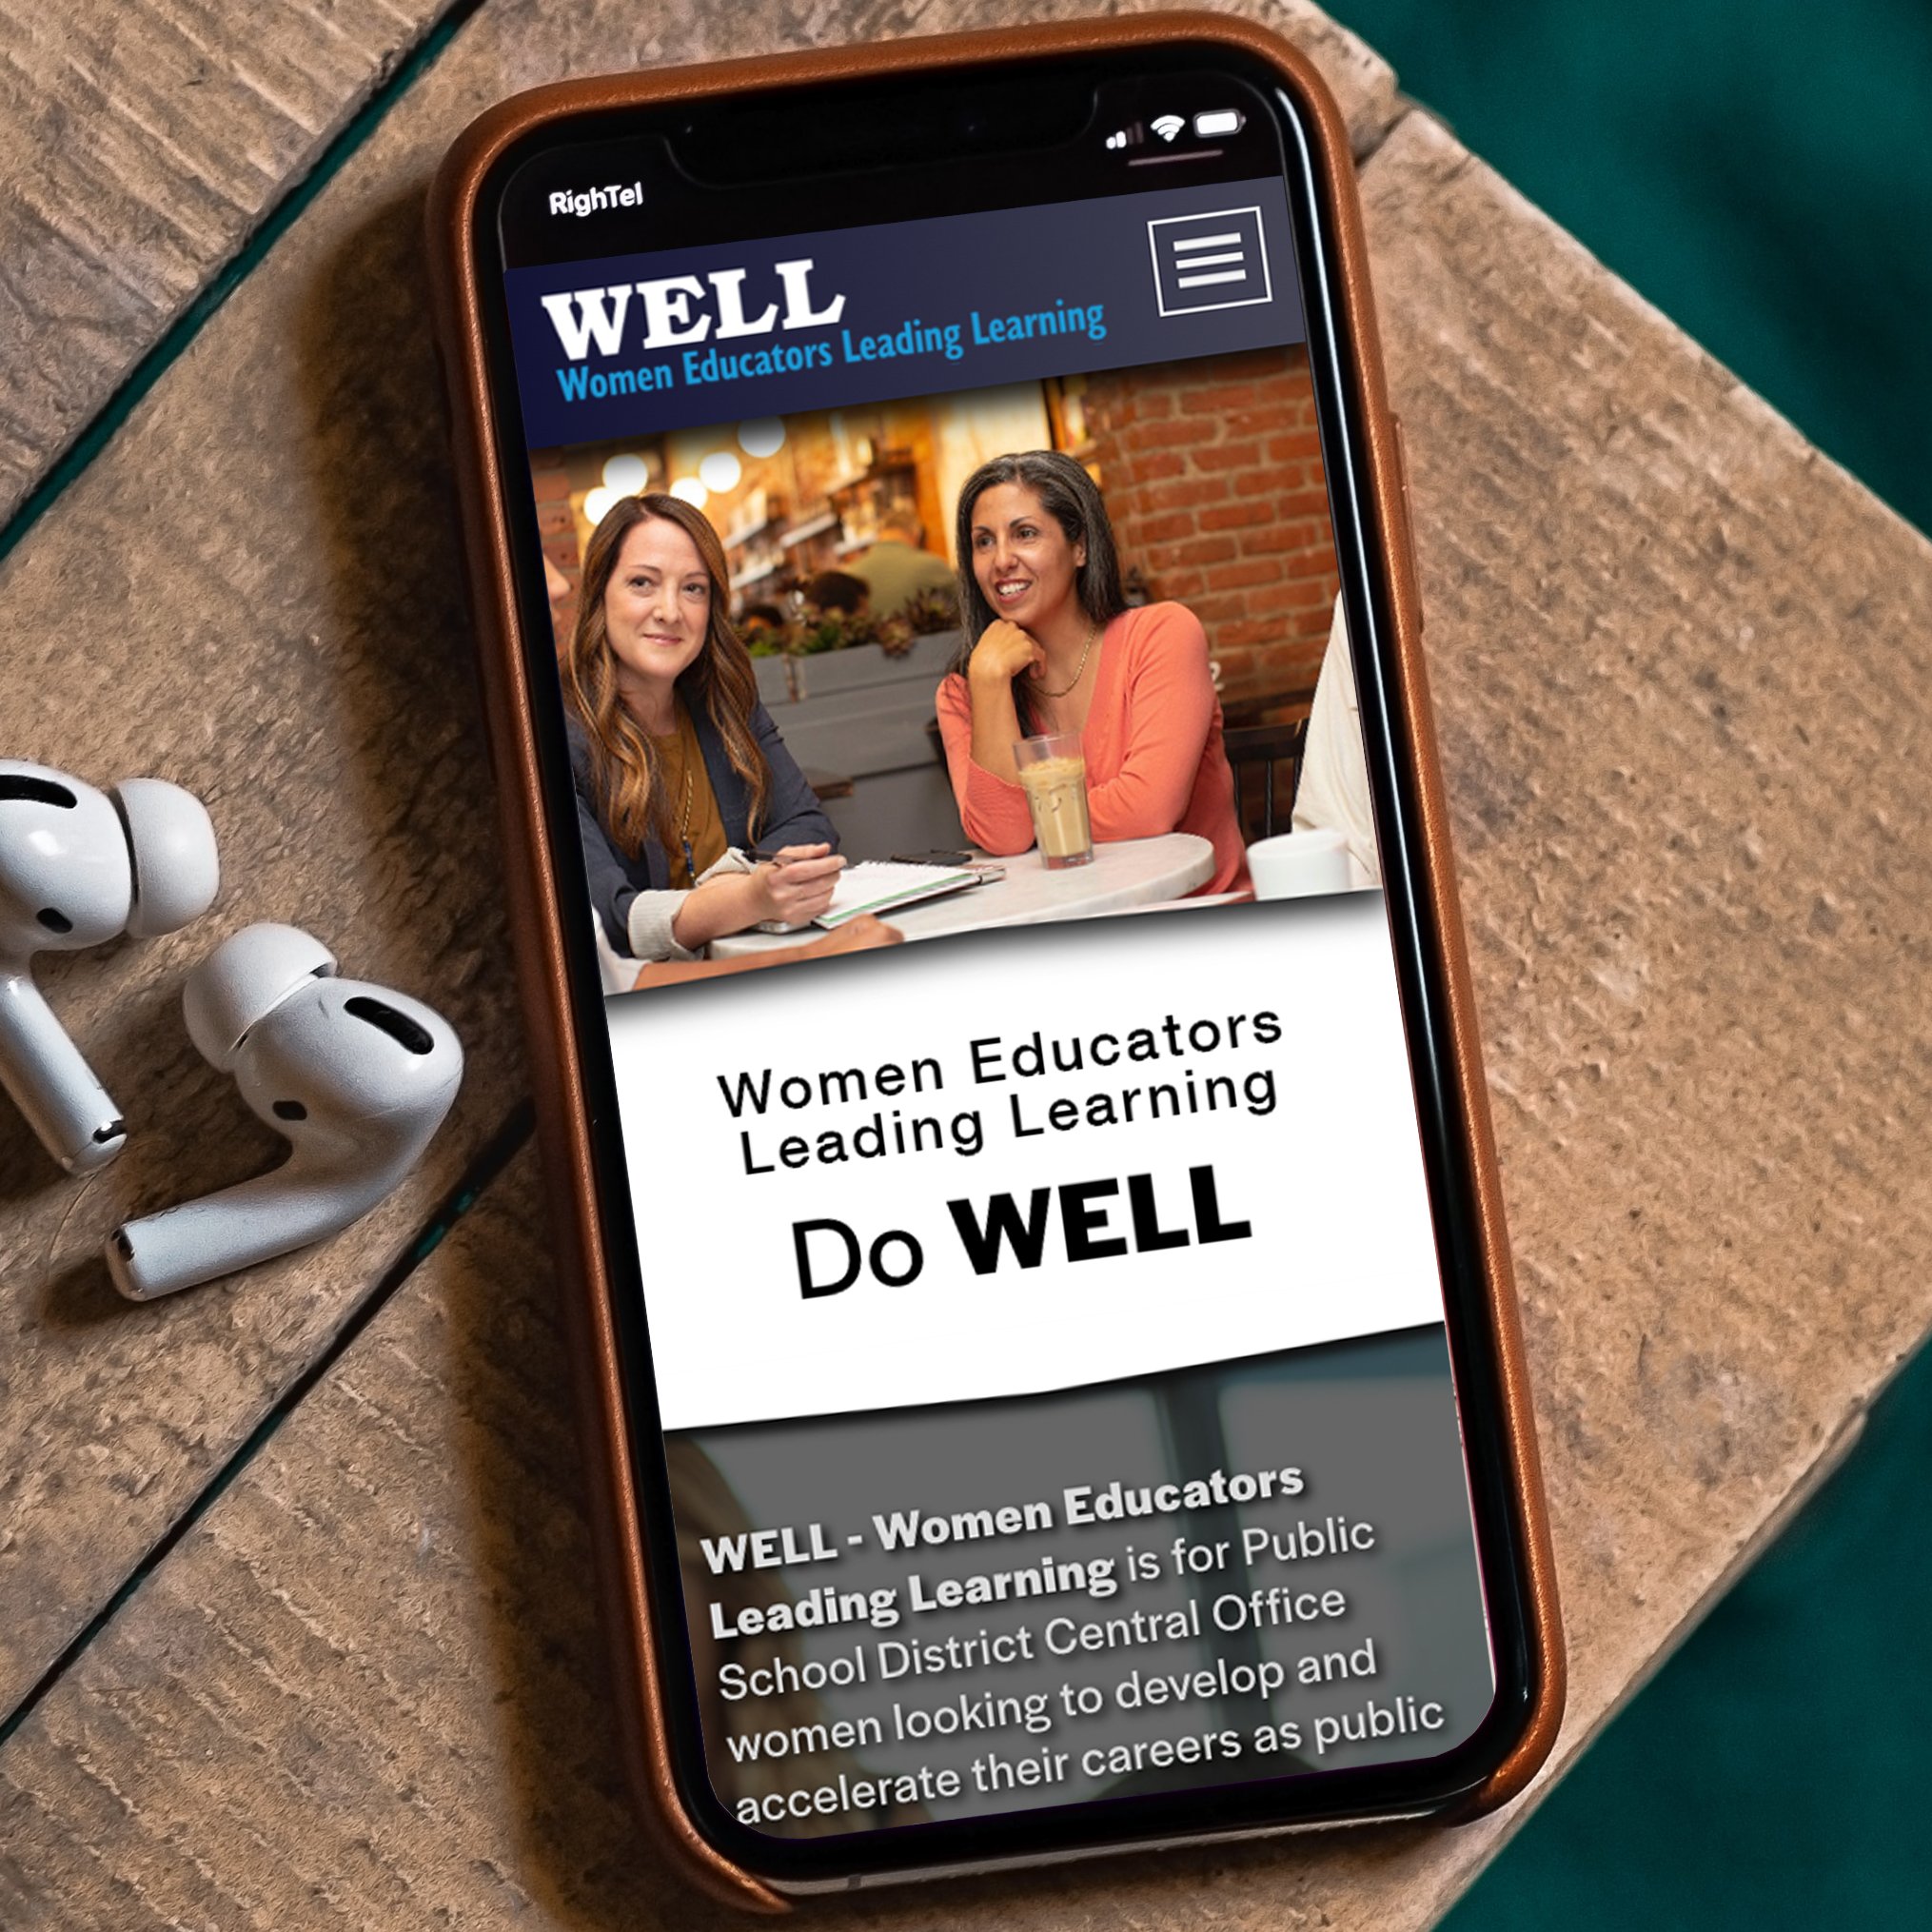 Website design and production - Mobile -- designed and illustrated by SP STUDIOS, for WELL - Women Educators Leading Learning, New England.